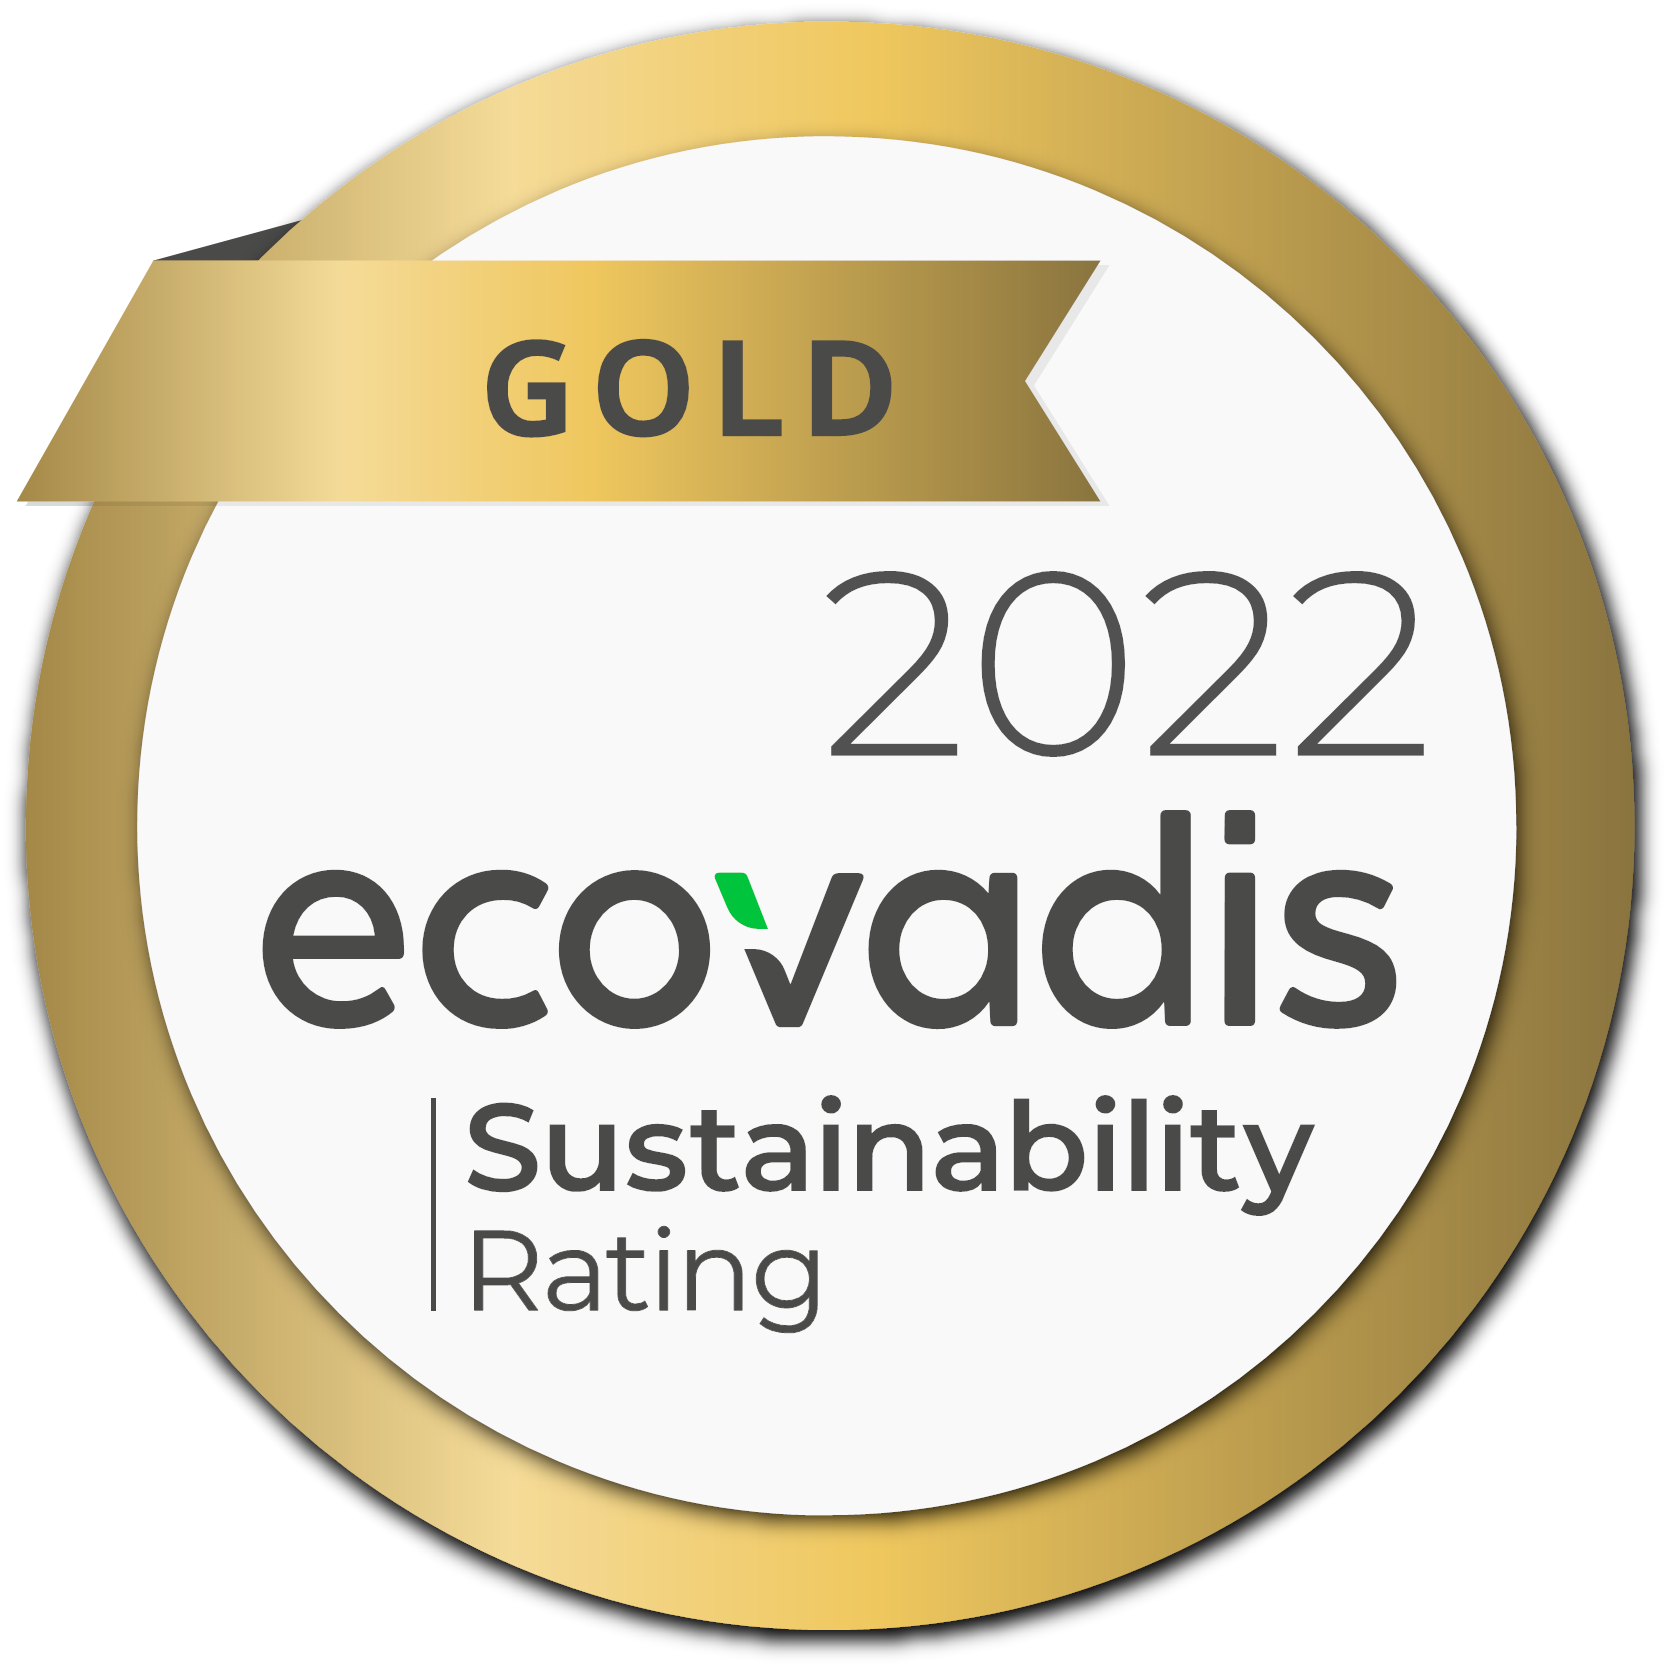 ALD AUTOMOTIVE GREECE WAS AWARDED WITH THE GOLD MEDAL BY ECOVADIS